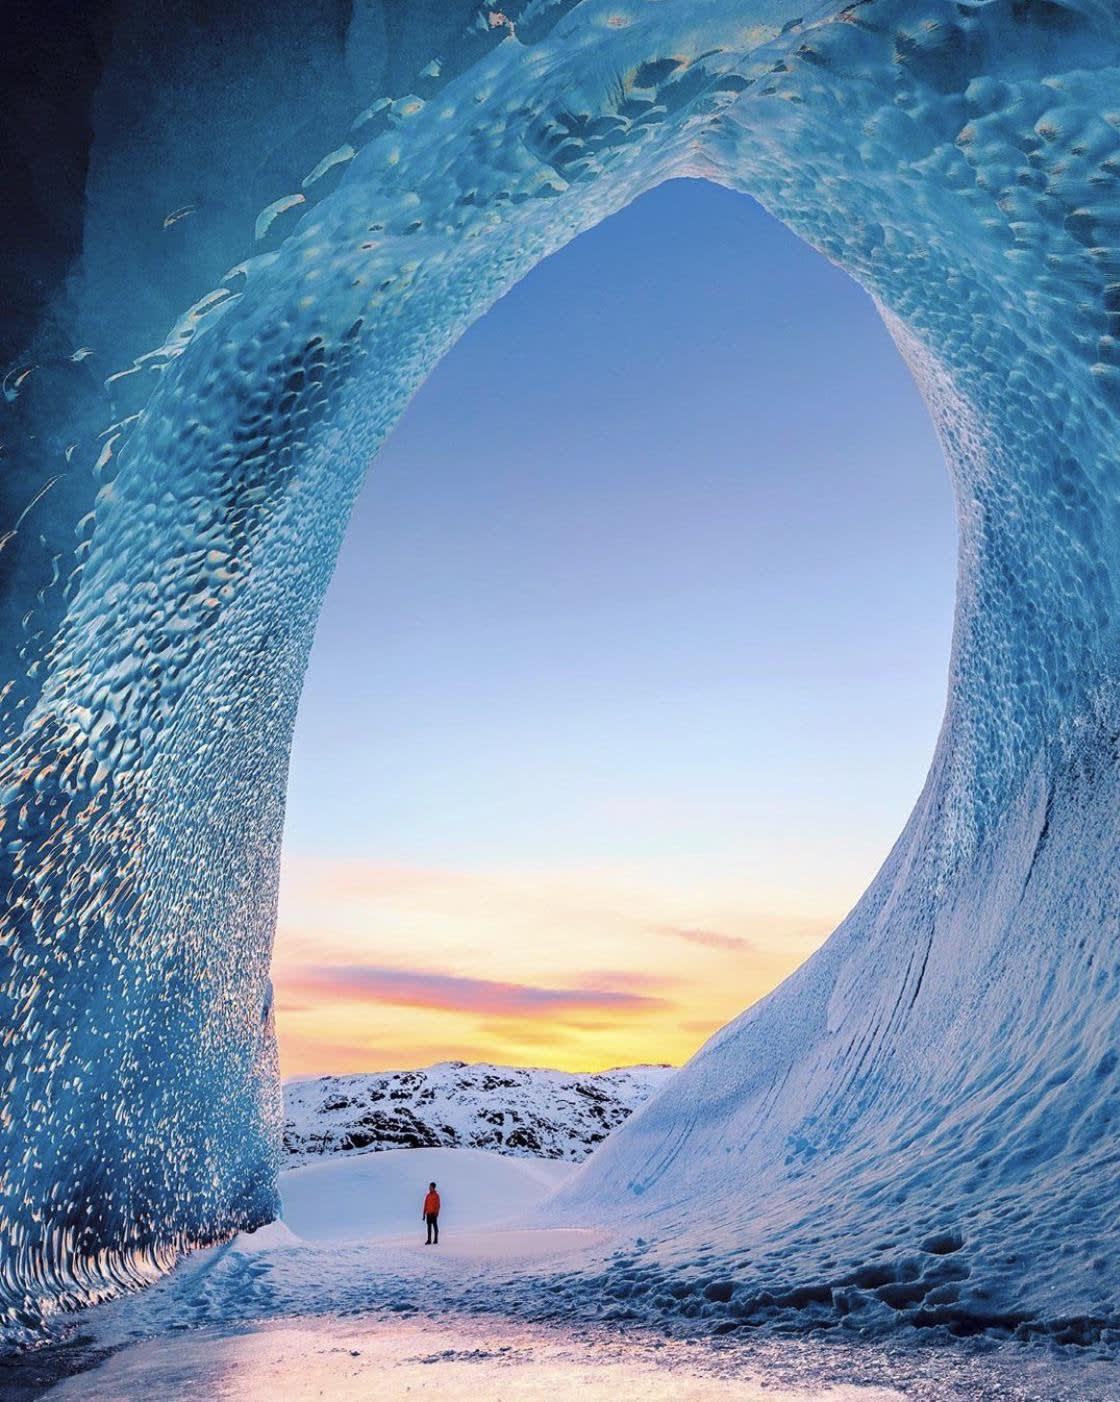 An ice cave in Iceland